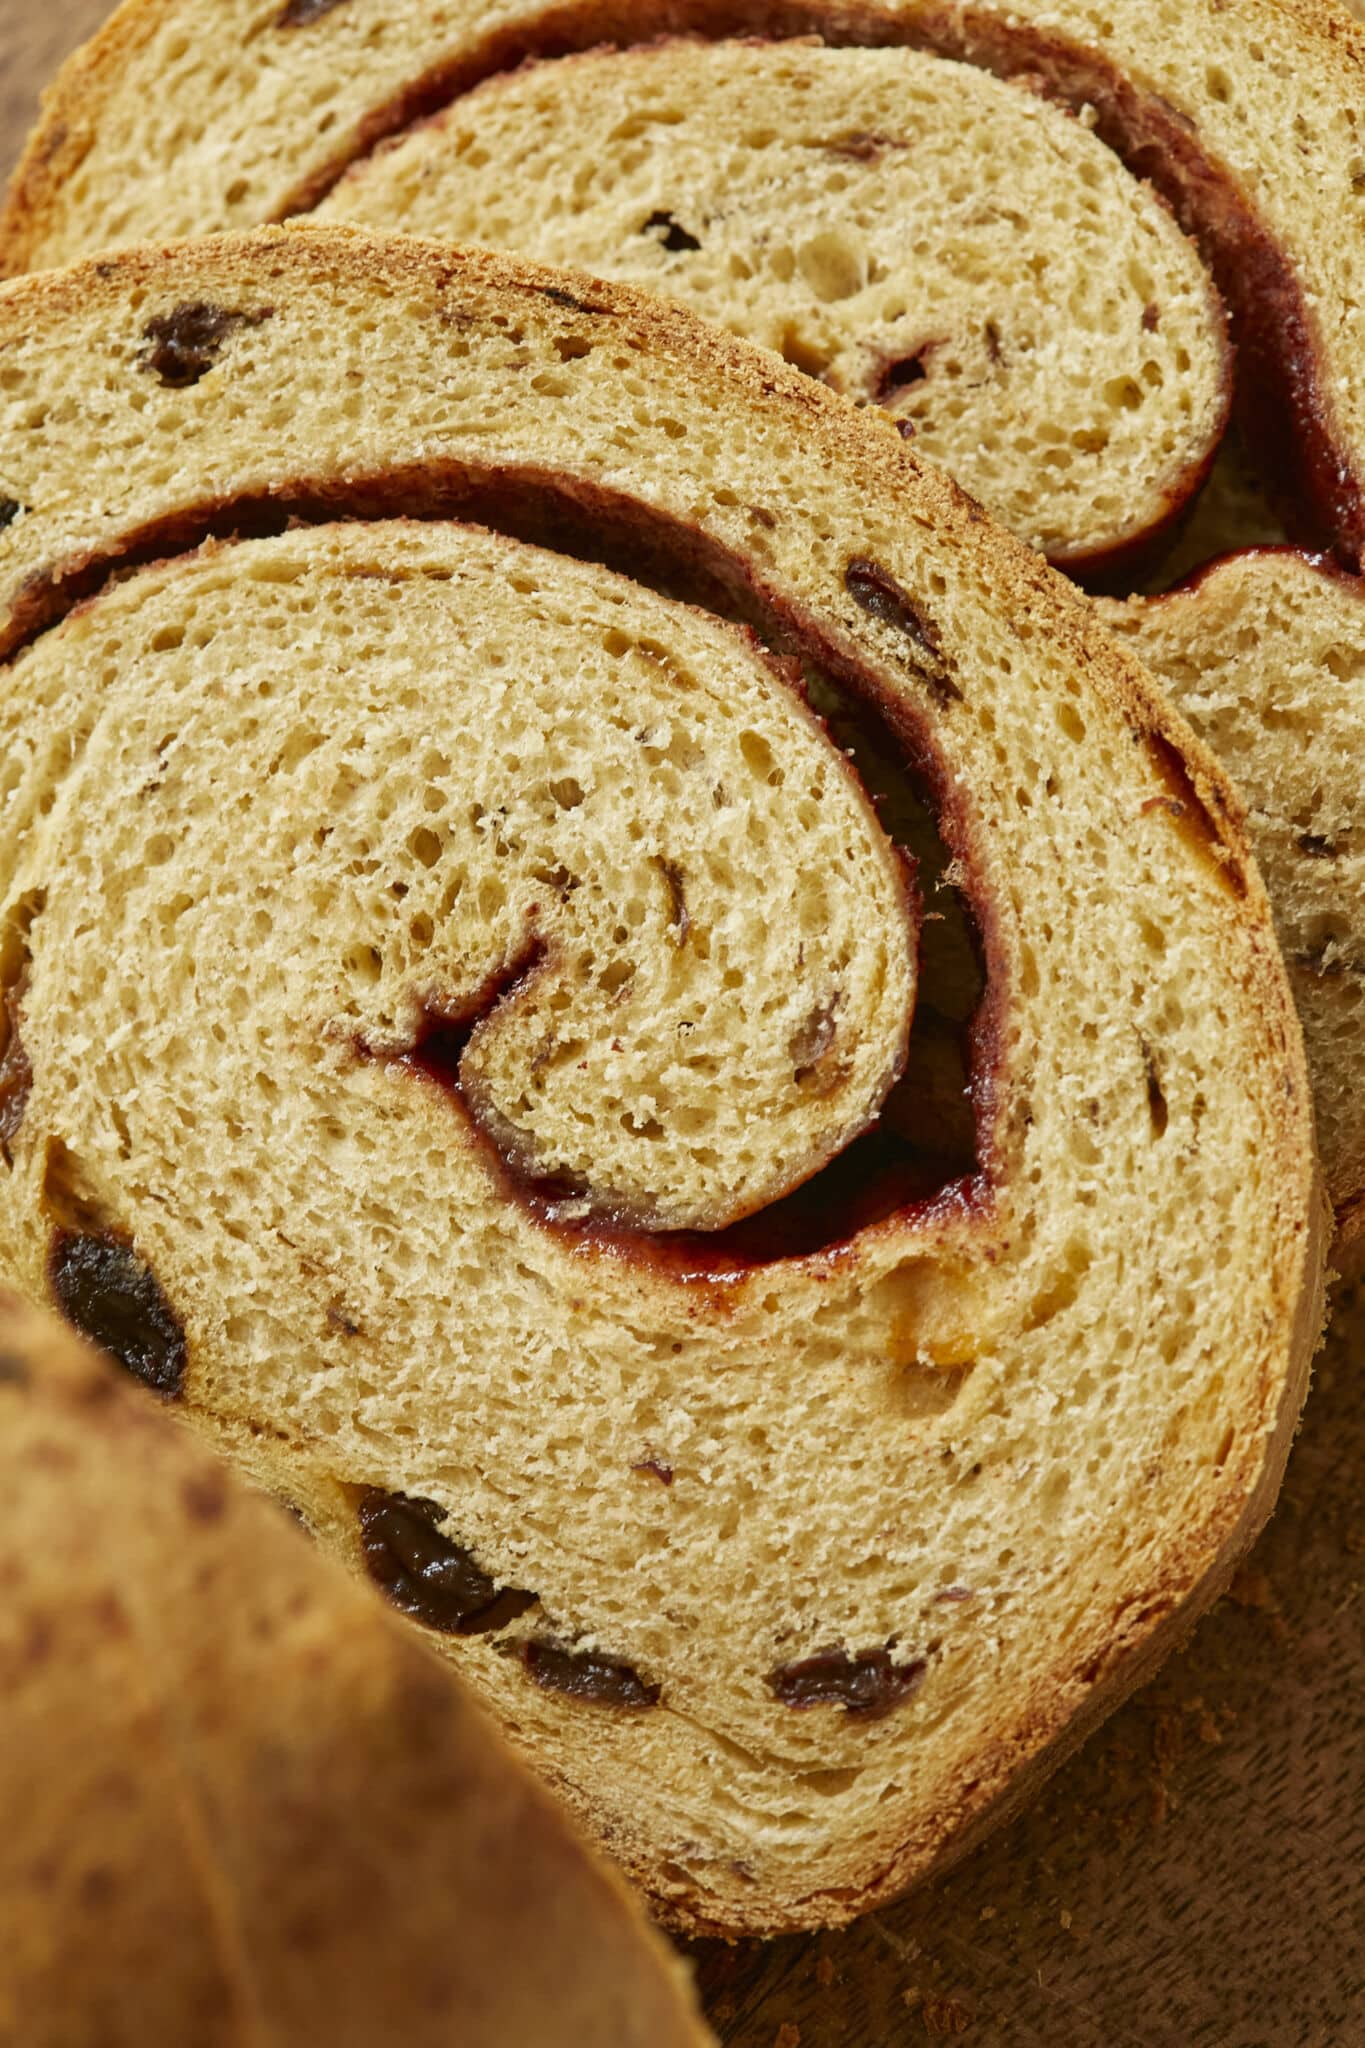 A close-up shot at the sliced Cinnamon Swirl Raisin Bread shows its golden-brown and slightly crispy crust, tender and even crumb, scattered raisins, and cinnamon swirls throughout upon slicing.